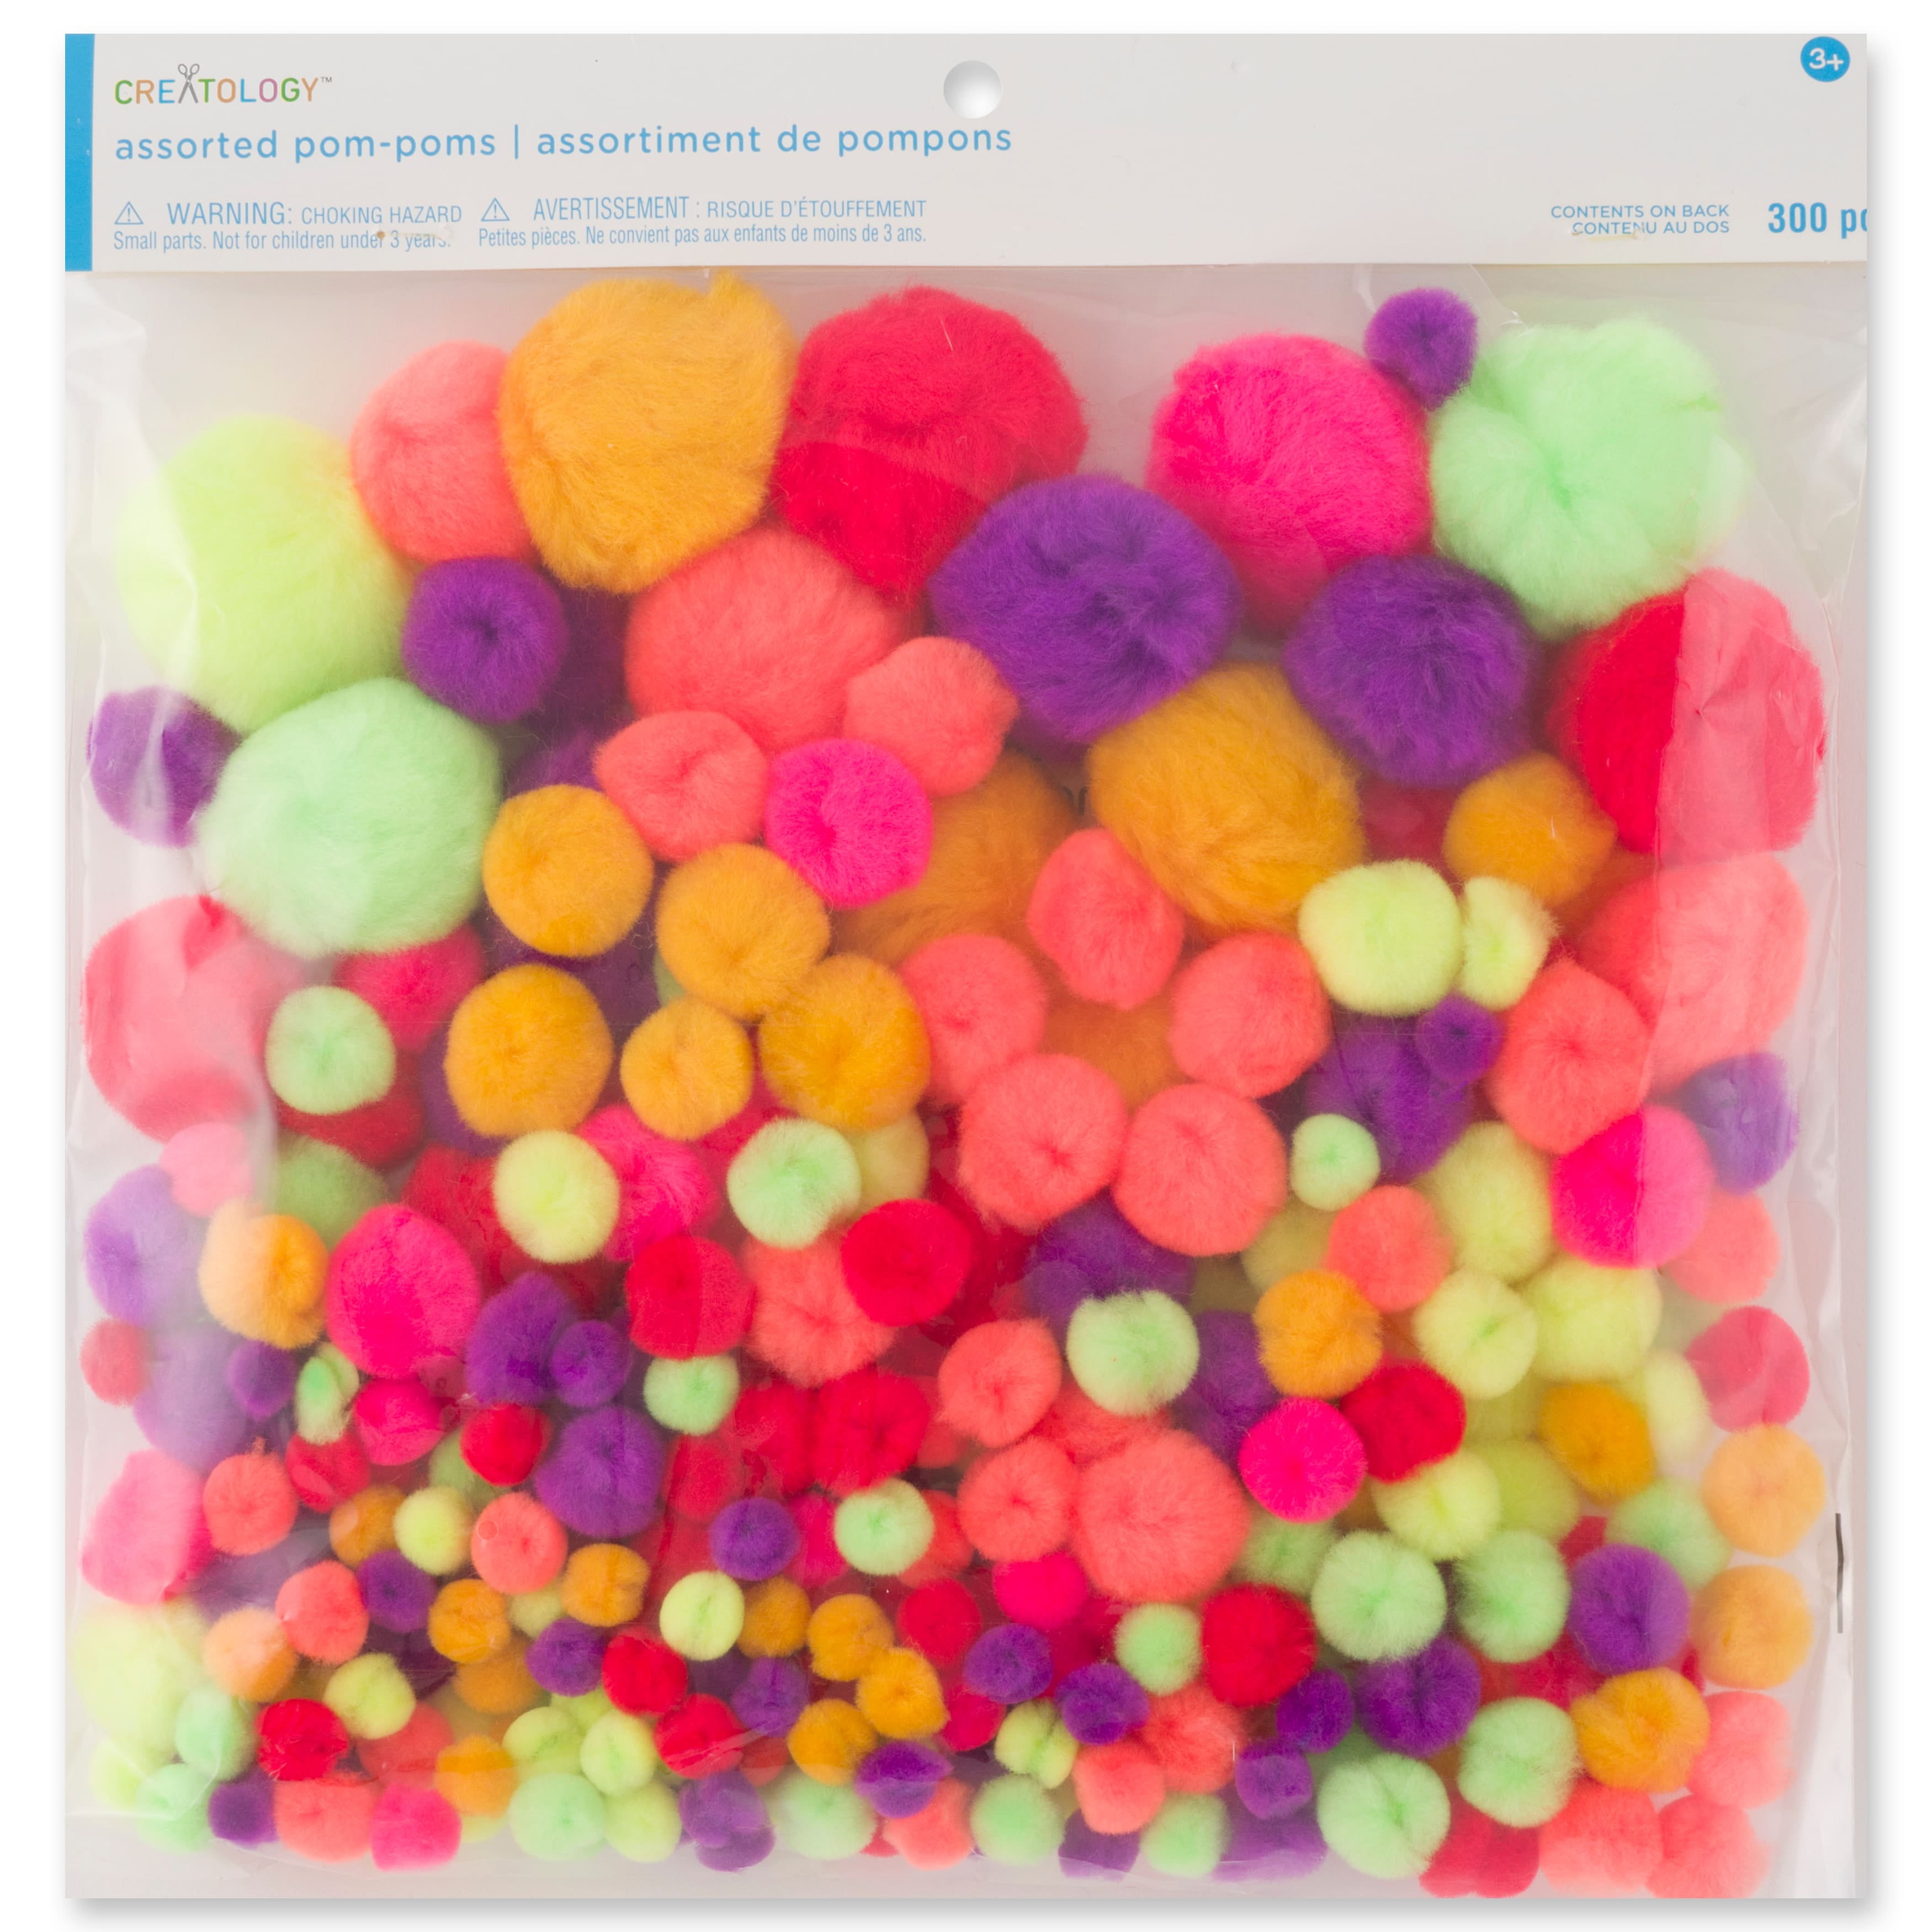 1200pcs Mini Pom Poms Arts And Crafts Back-to-school Gift Puzzle Craft Set,  Colorful Assorted Pompoms, Rainbow Puff Cotton Balls For Crafts, Diy  Project Home Party Holiday Creative Decorations - Toys & Games 